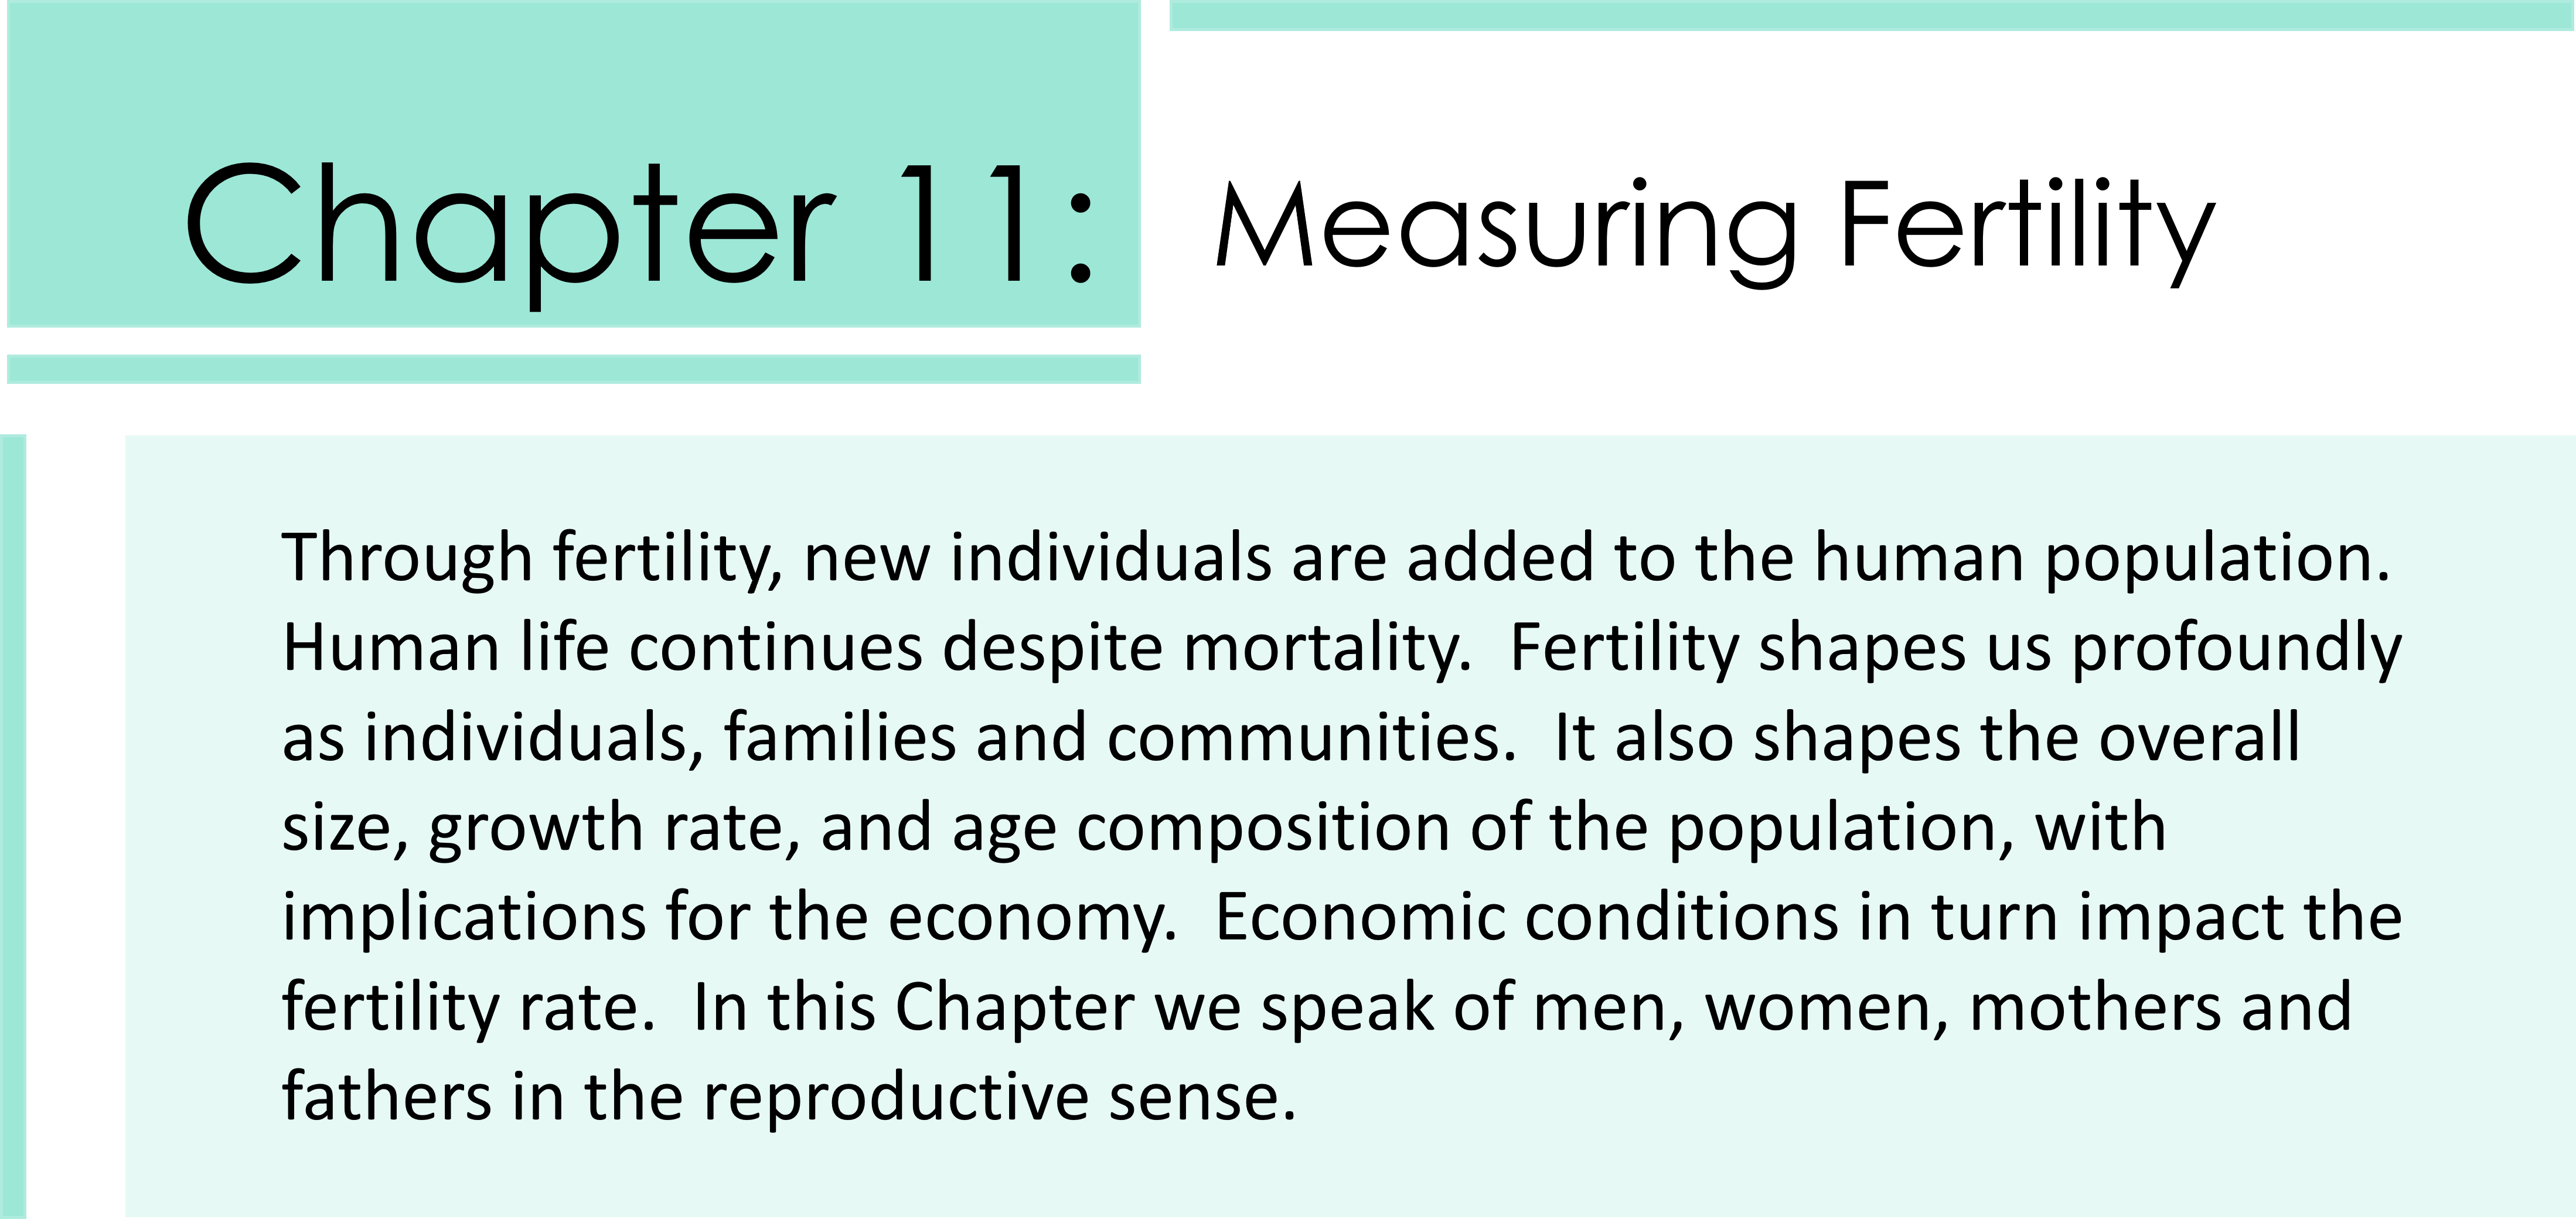 Through fertility, new individuals are added to the human population. Human life continues despite mortality. Fertility shapes us profoundly as individuals, families and communities. It also shapes the overall size, growth rate, and age composition of the population, with implications for the economy. Economic conditions in turn impact the fertility rate. In this Chapter we speak of men, women, mothers and fathers in the reproductive sense.